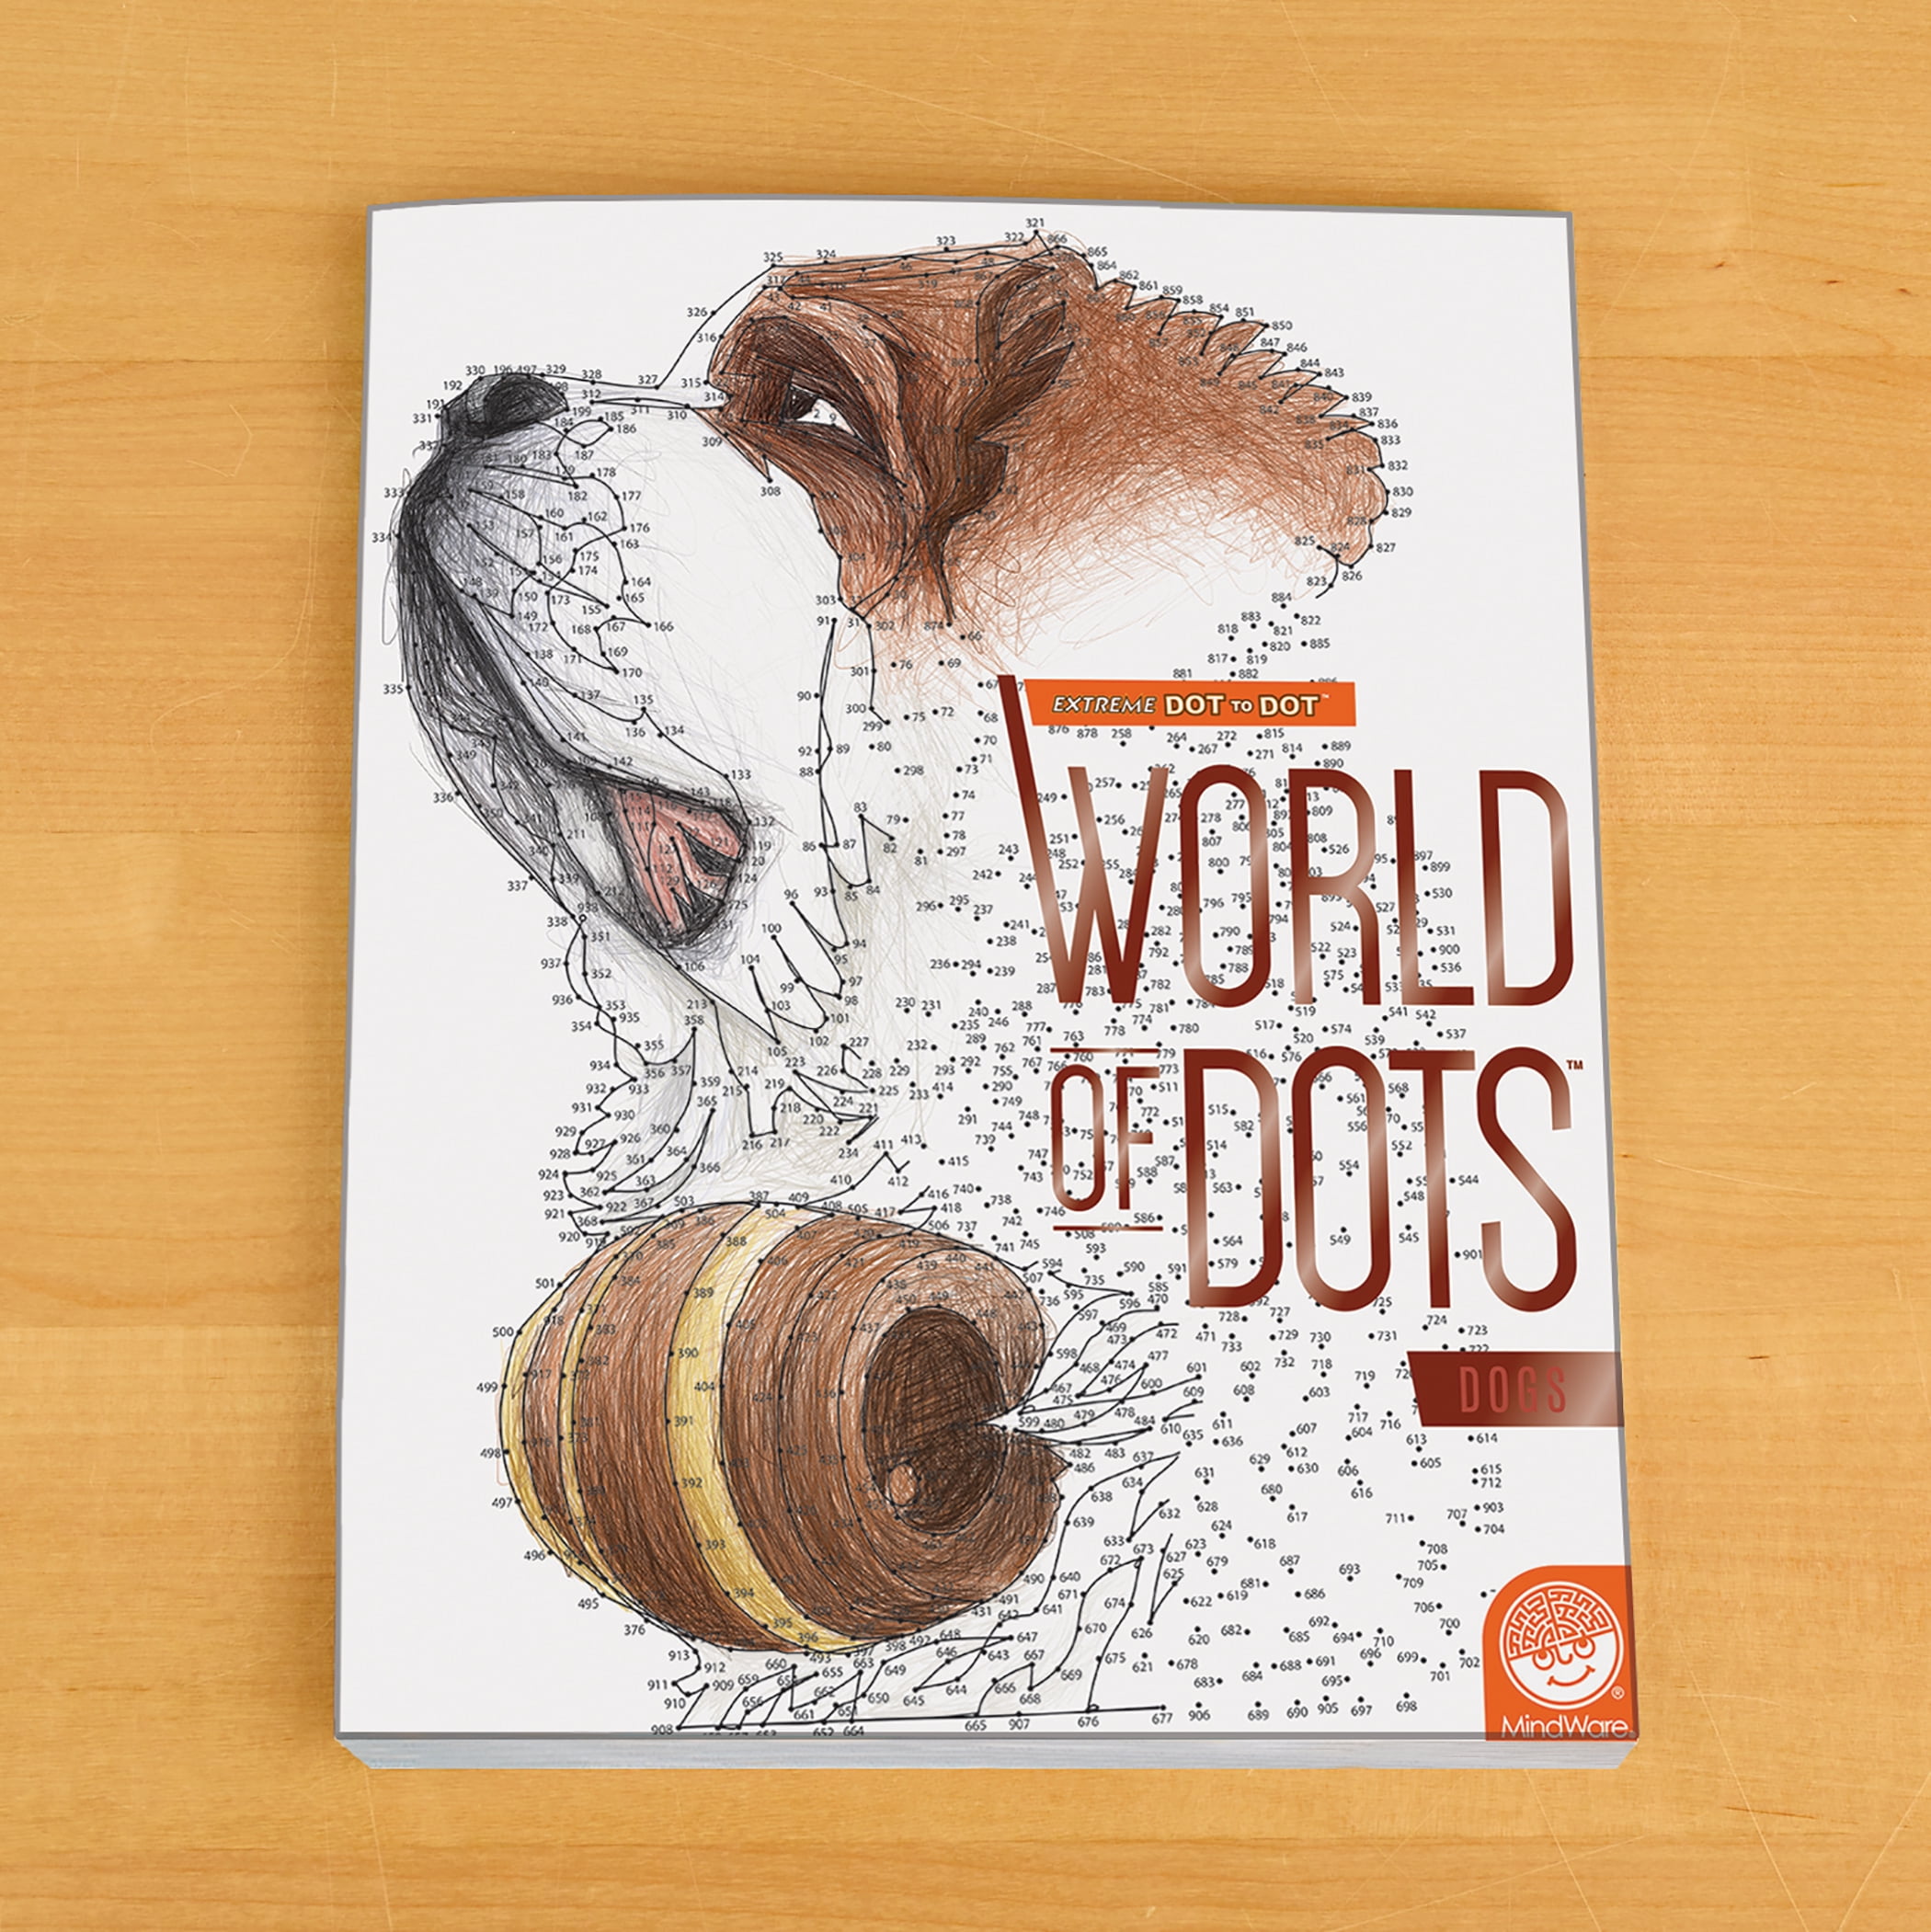 Extreme Dot to Dot - World of Dots - Dogs